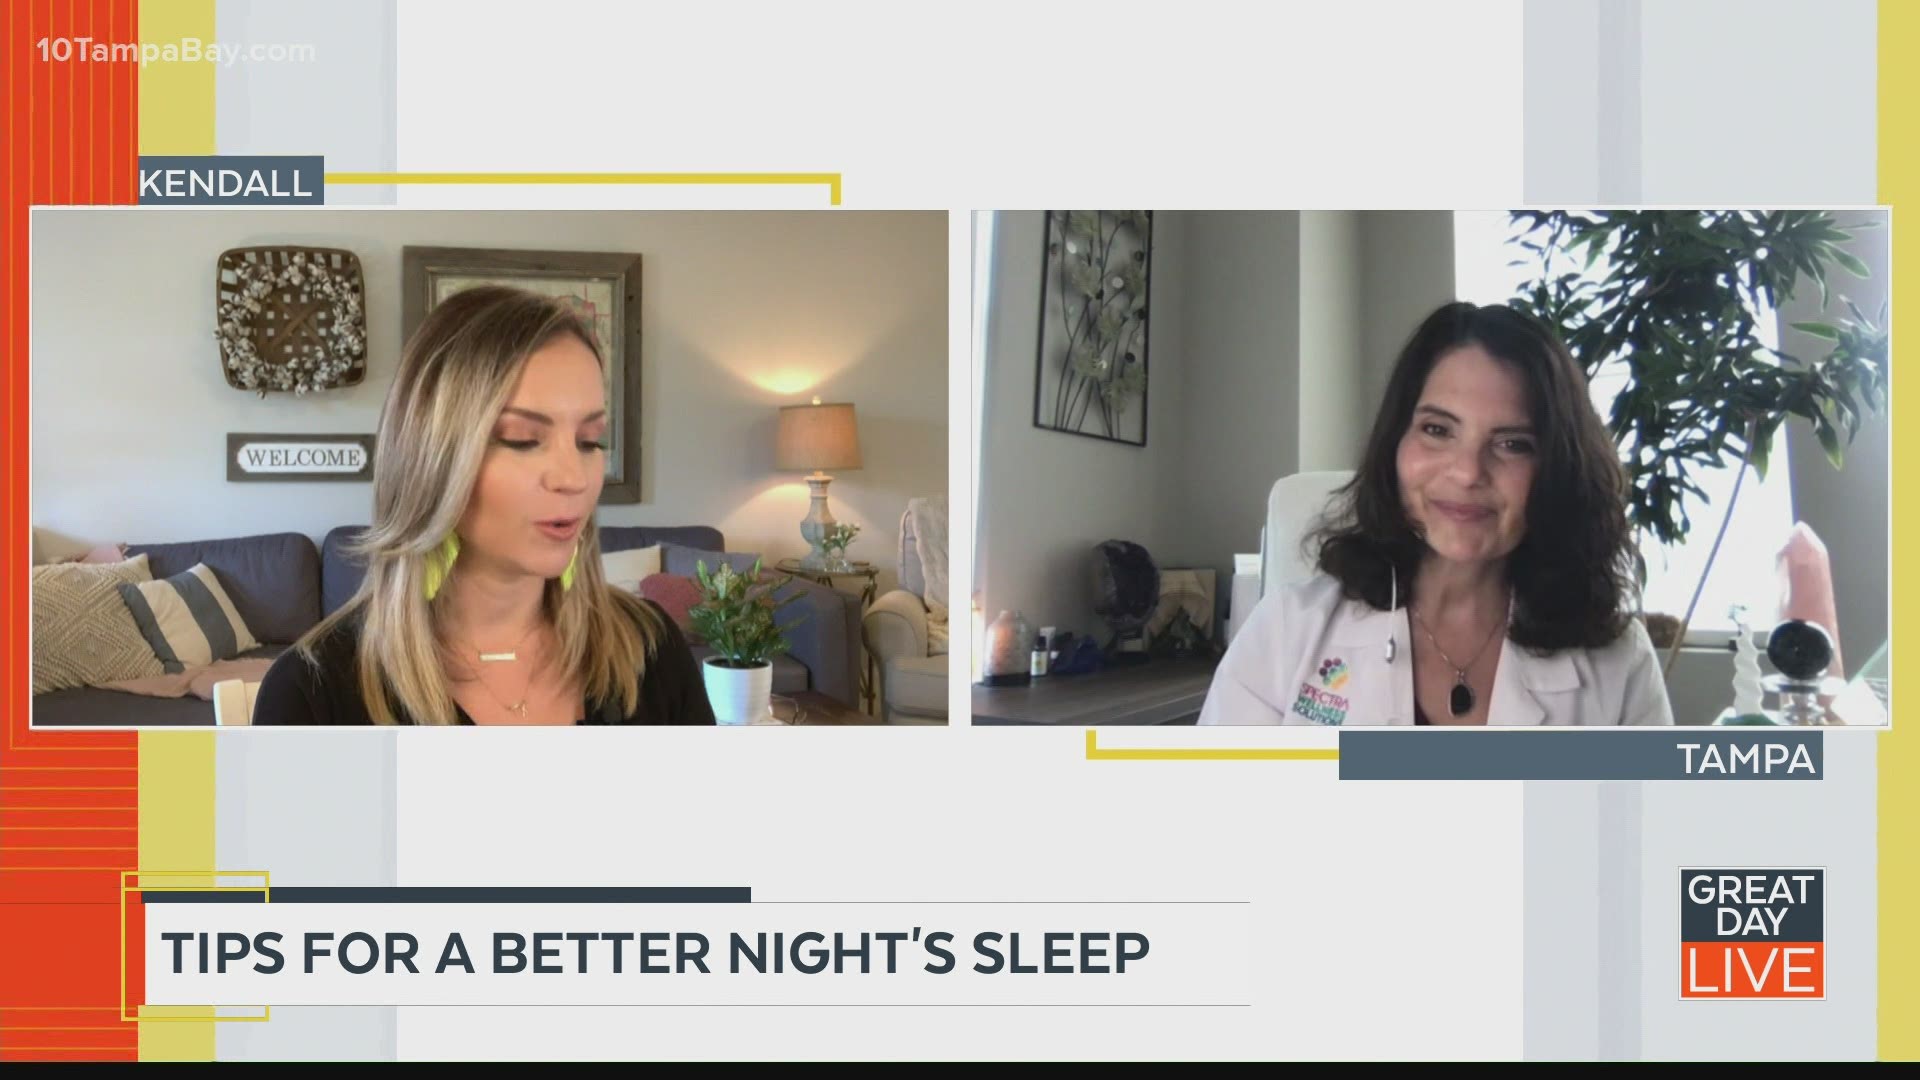 Tips for getting a better night’s sleep